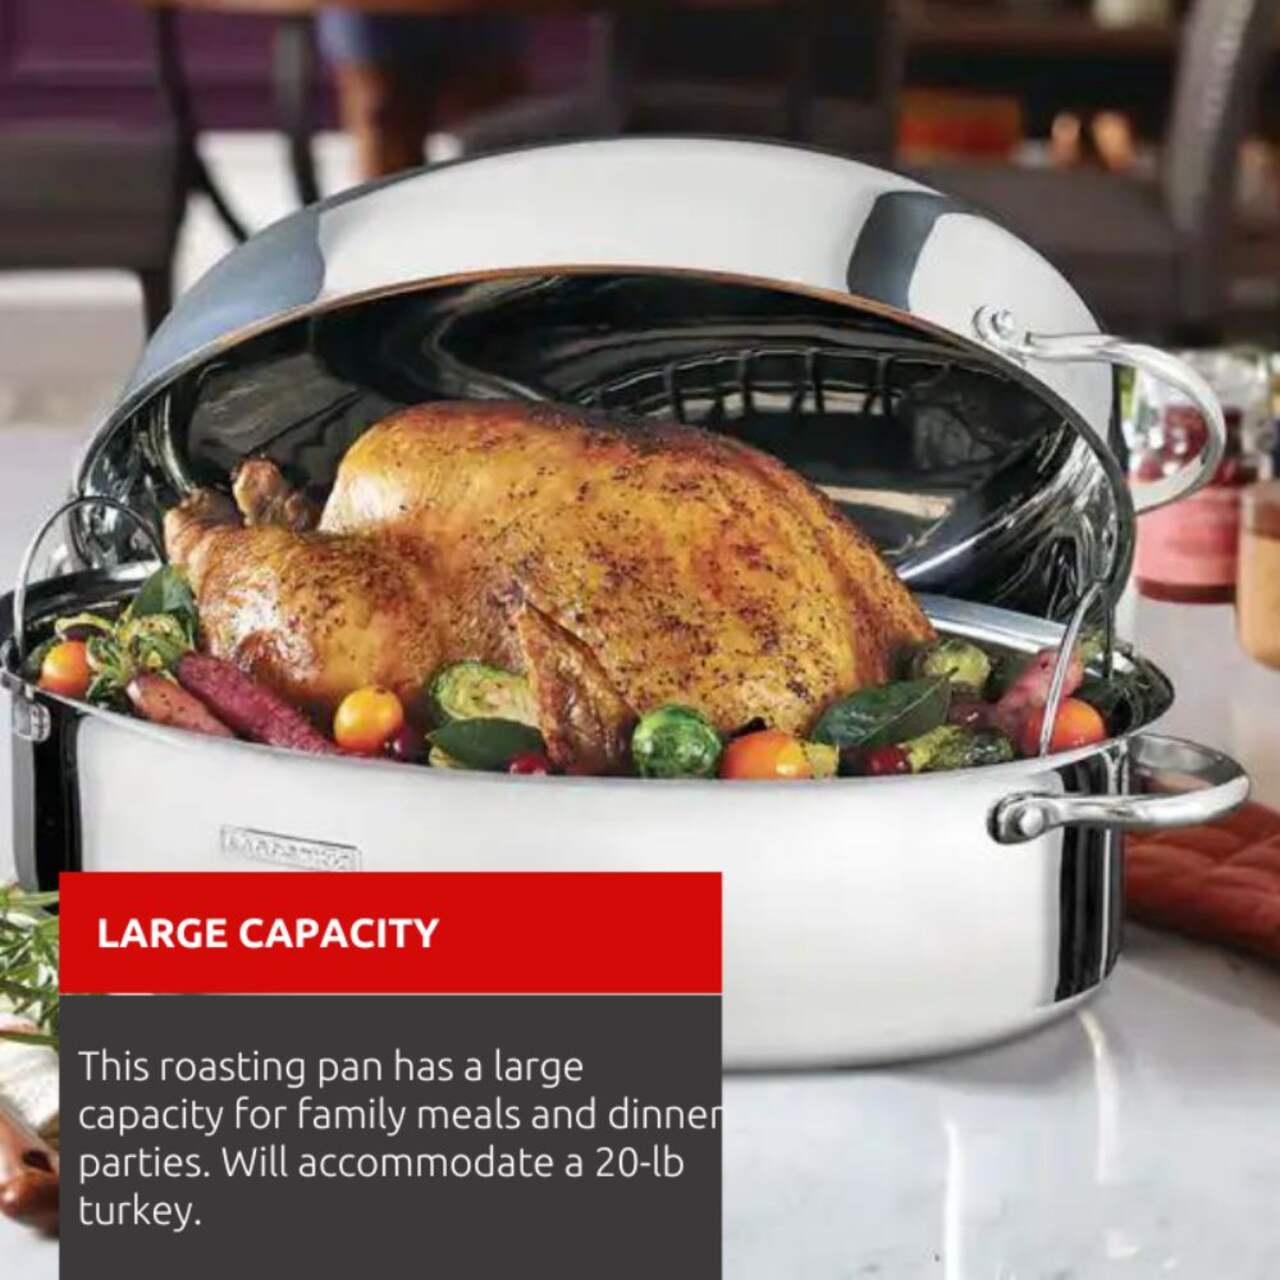 https://media-www.canadiantire.ca/product/living/kitchen/cookware/1428336/lagostina-18-10-stainless-steel-roaster-58ba9077-a8aa-4f0c-b4ba-d7130e6dc2ff-jpgrendition.jpg?imdensity=1&imwidth=1244&impolicy=mZoom